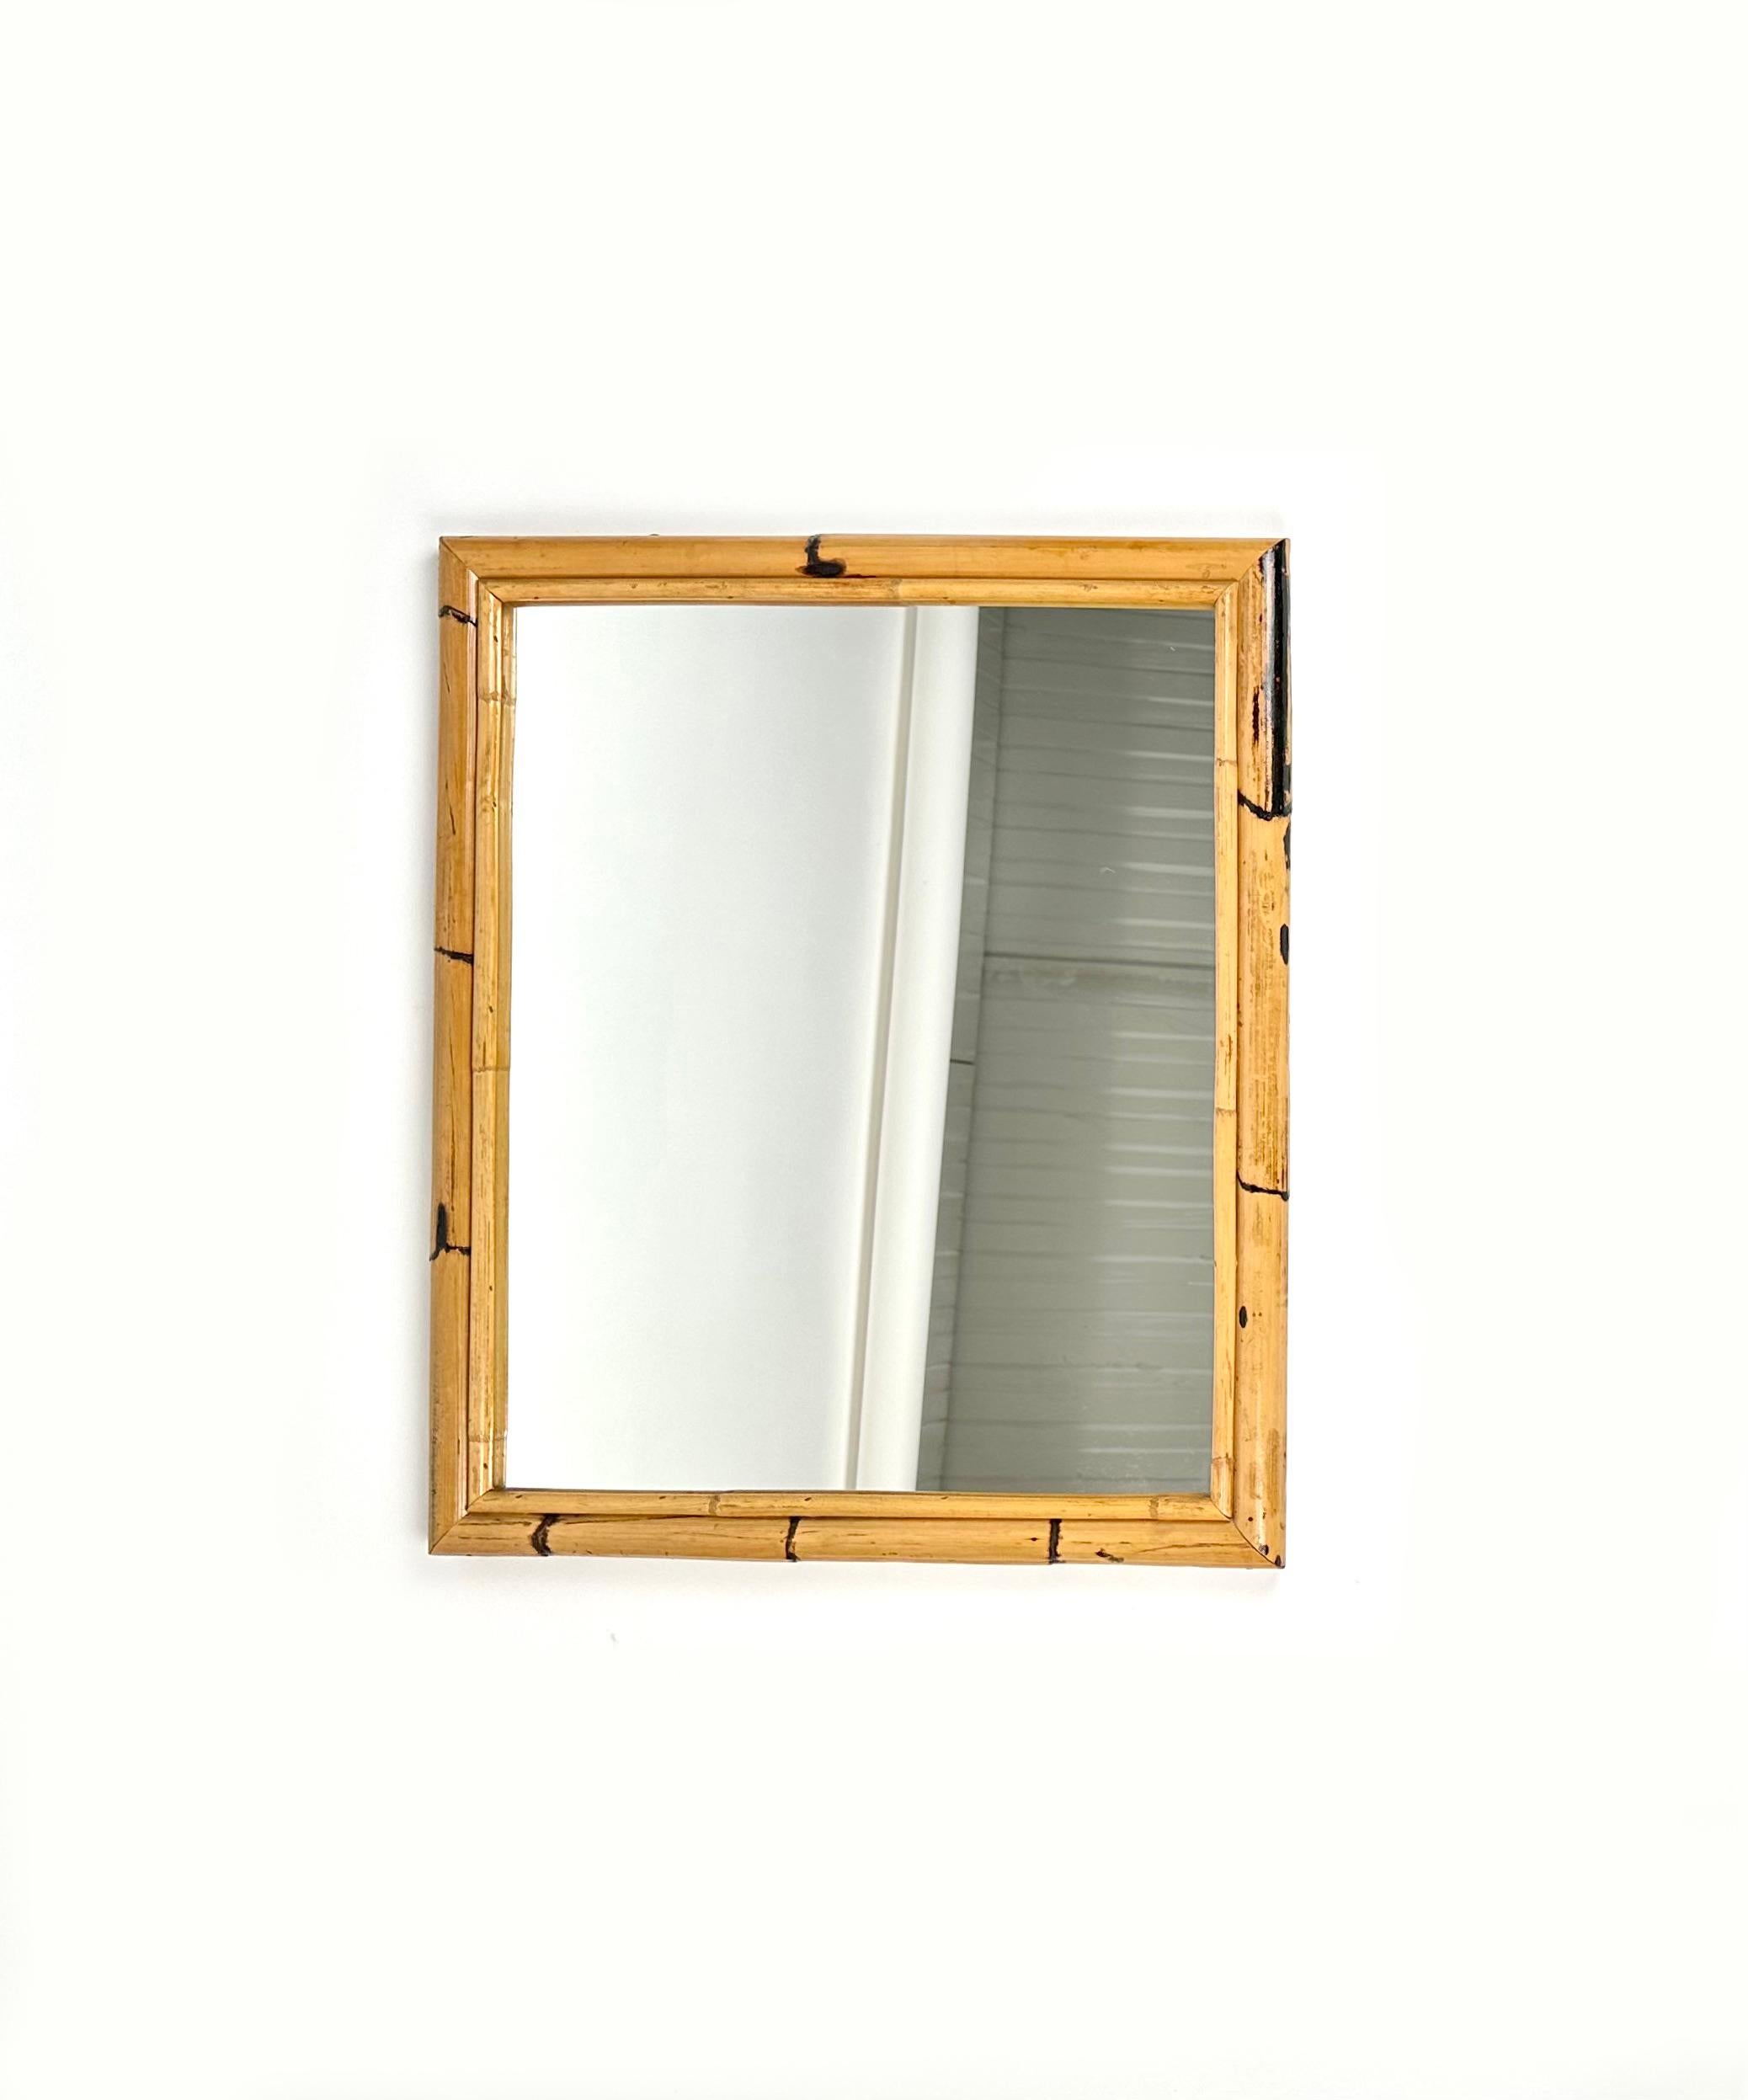 Midcentury Rectangular Wall Mirror Double Bamboo Frame, Italy 1970s In Good Condition For Sale In Rome, IT